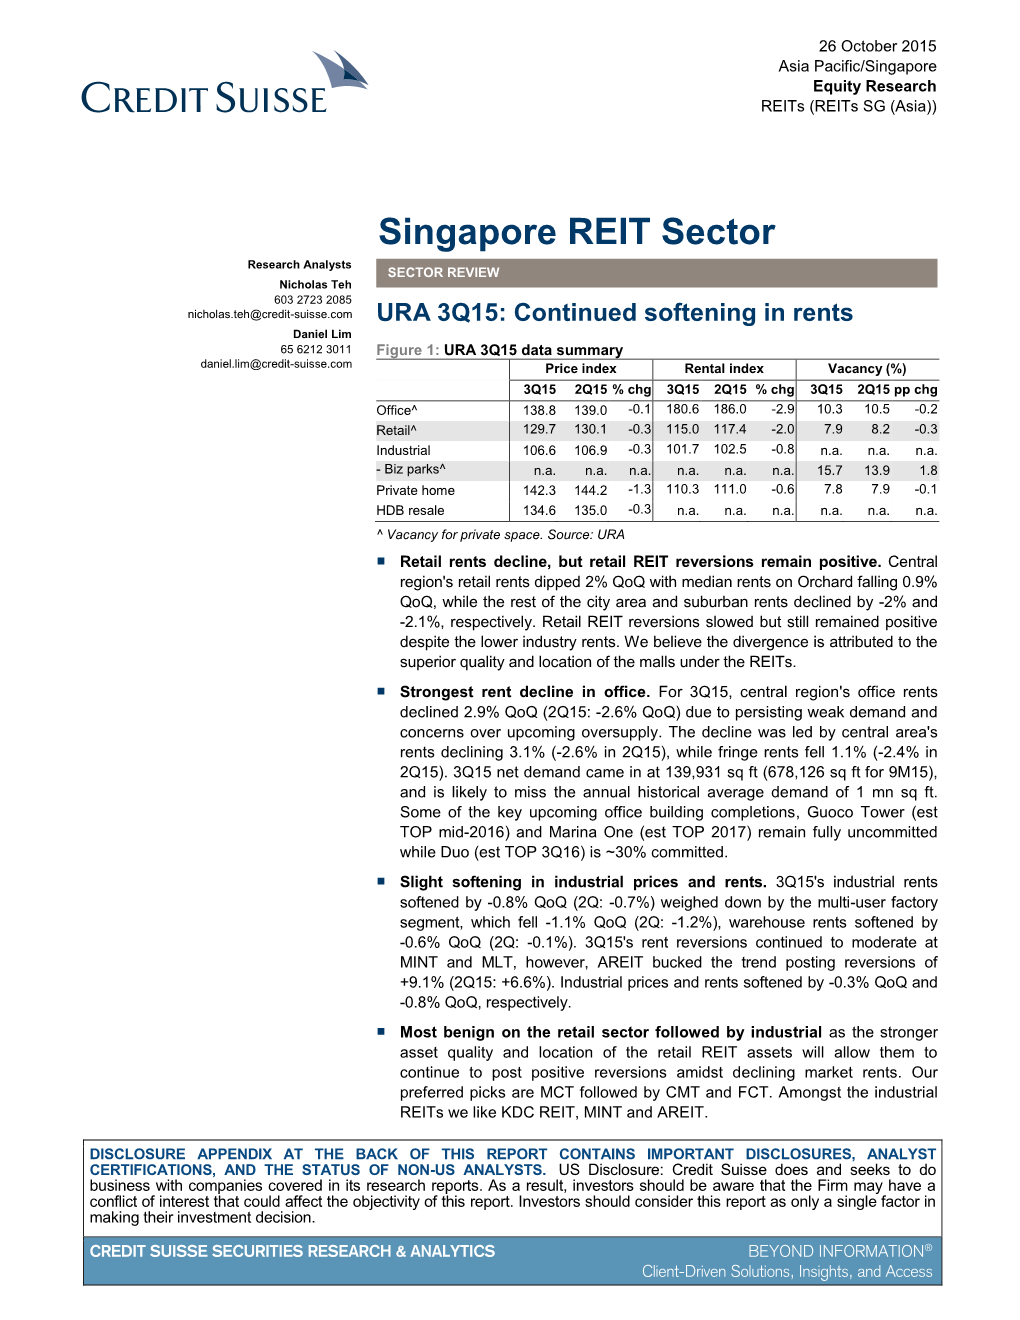 Singapore REIT Sector Research Analysts SECTOR REVIEW